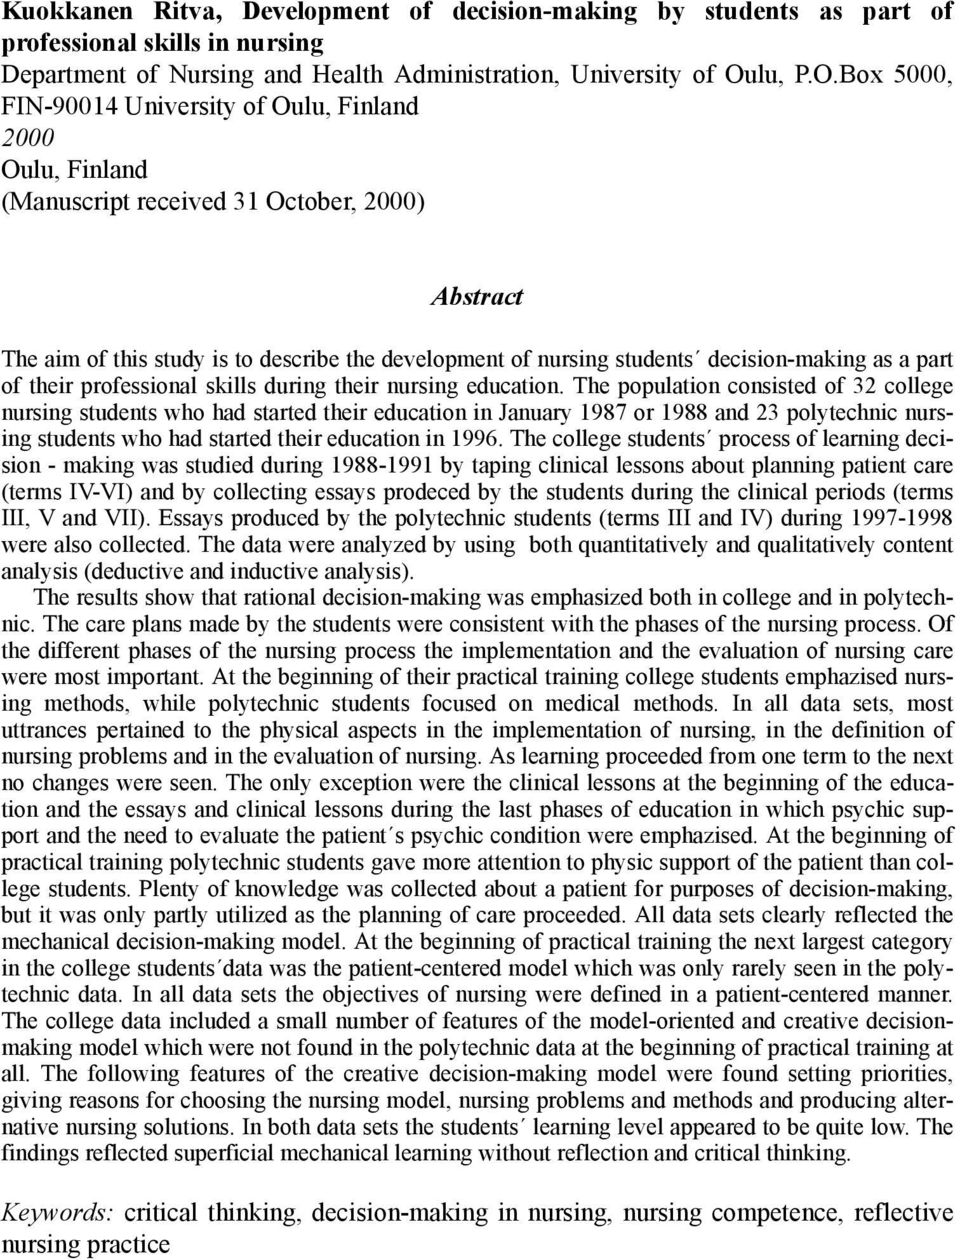 Box 5000, FIN-90014 University of Oulu, Finland 2000 Oulu, Finland (Manuscript received 31 October, 2000) Abstract The aim of this study is to describe the development of nursing students